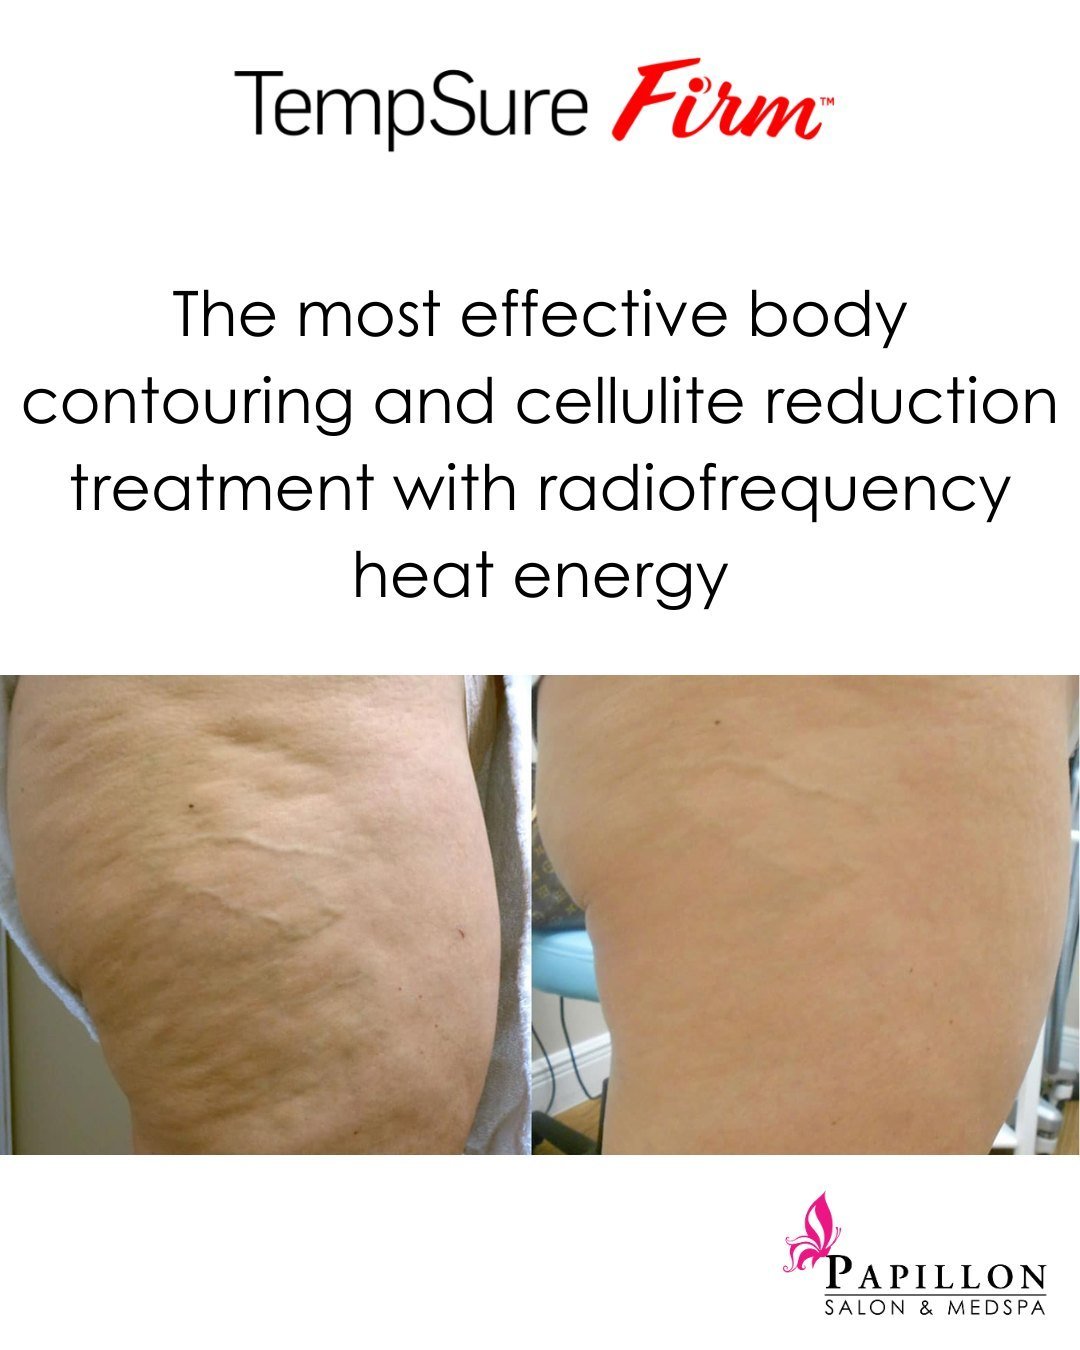 Transform your body with TempSure Firm! Say goodbye to cellulite and hello to smooth, contoured skin. Our state-of-the-art device uses radiofrequency heat energy to target and eliminate fat cells while promoting collagen production for a tighter, fir